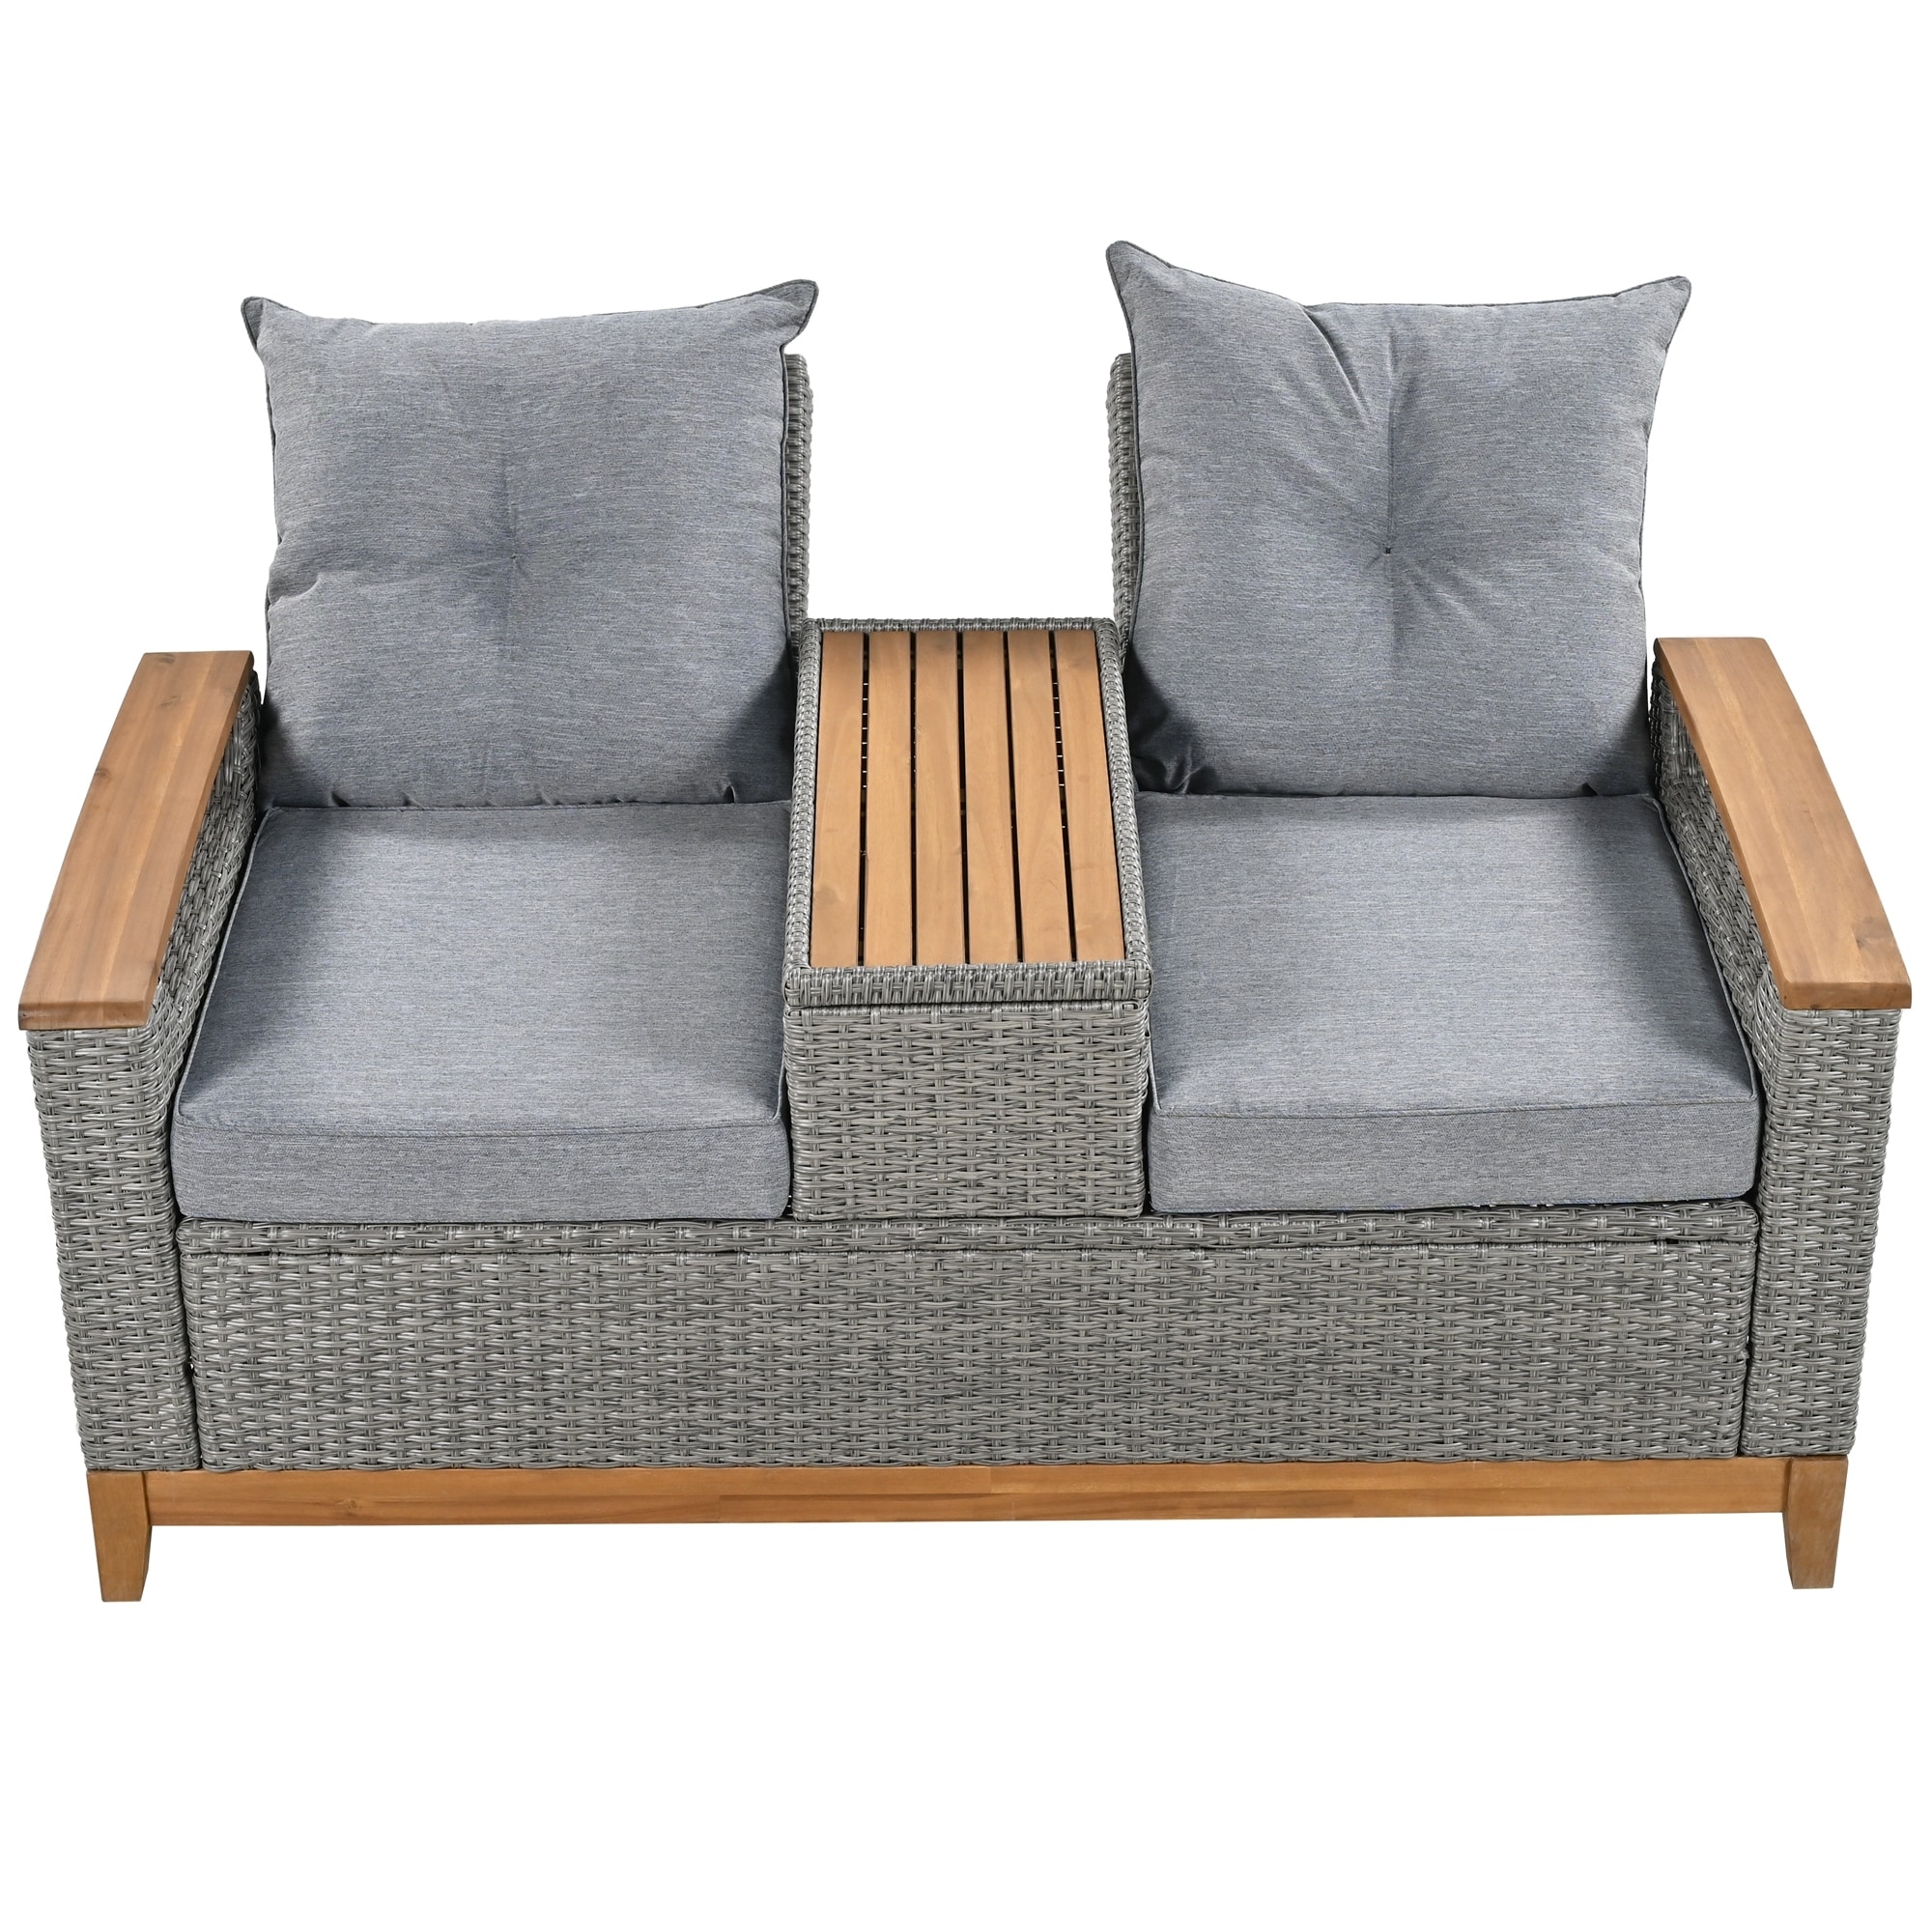 Outdoor Adjustable Armrest Loveseat With Storage Space And Removable Cushion